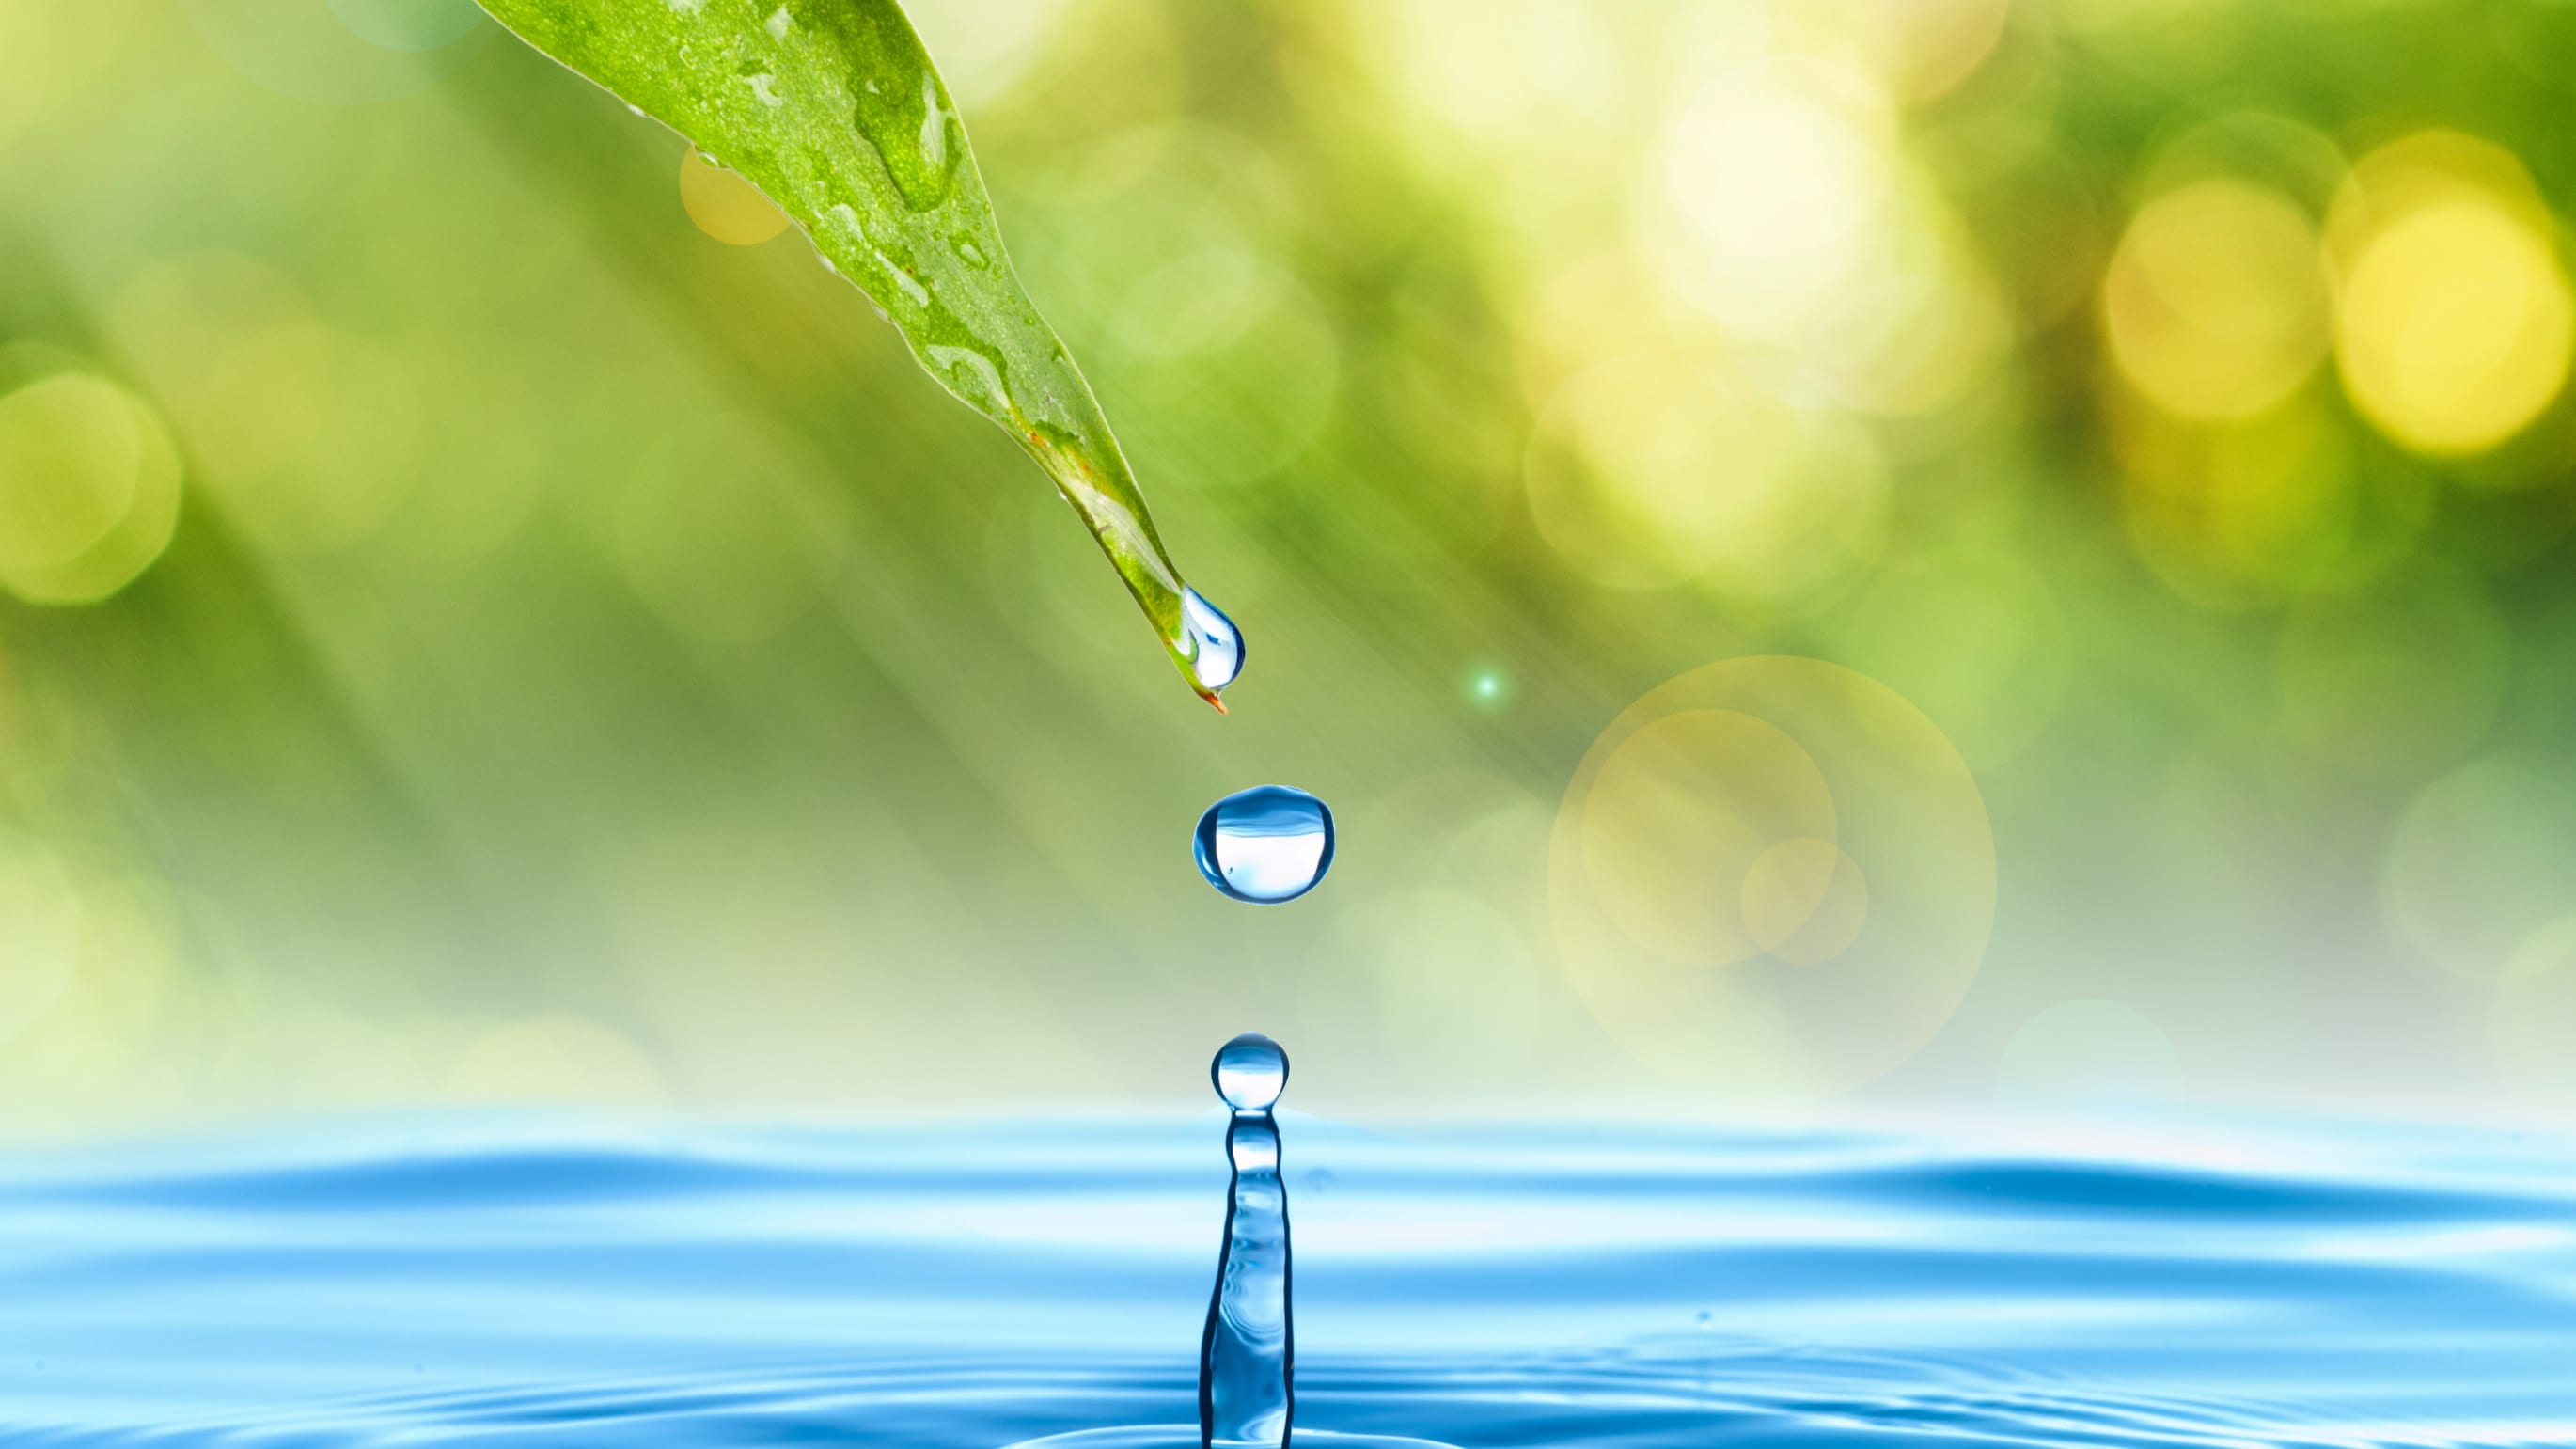 stock image of a water droplet